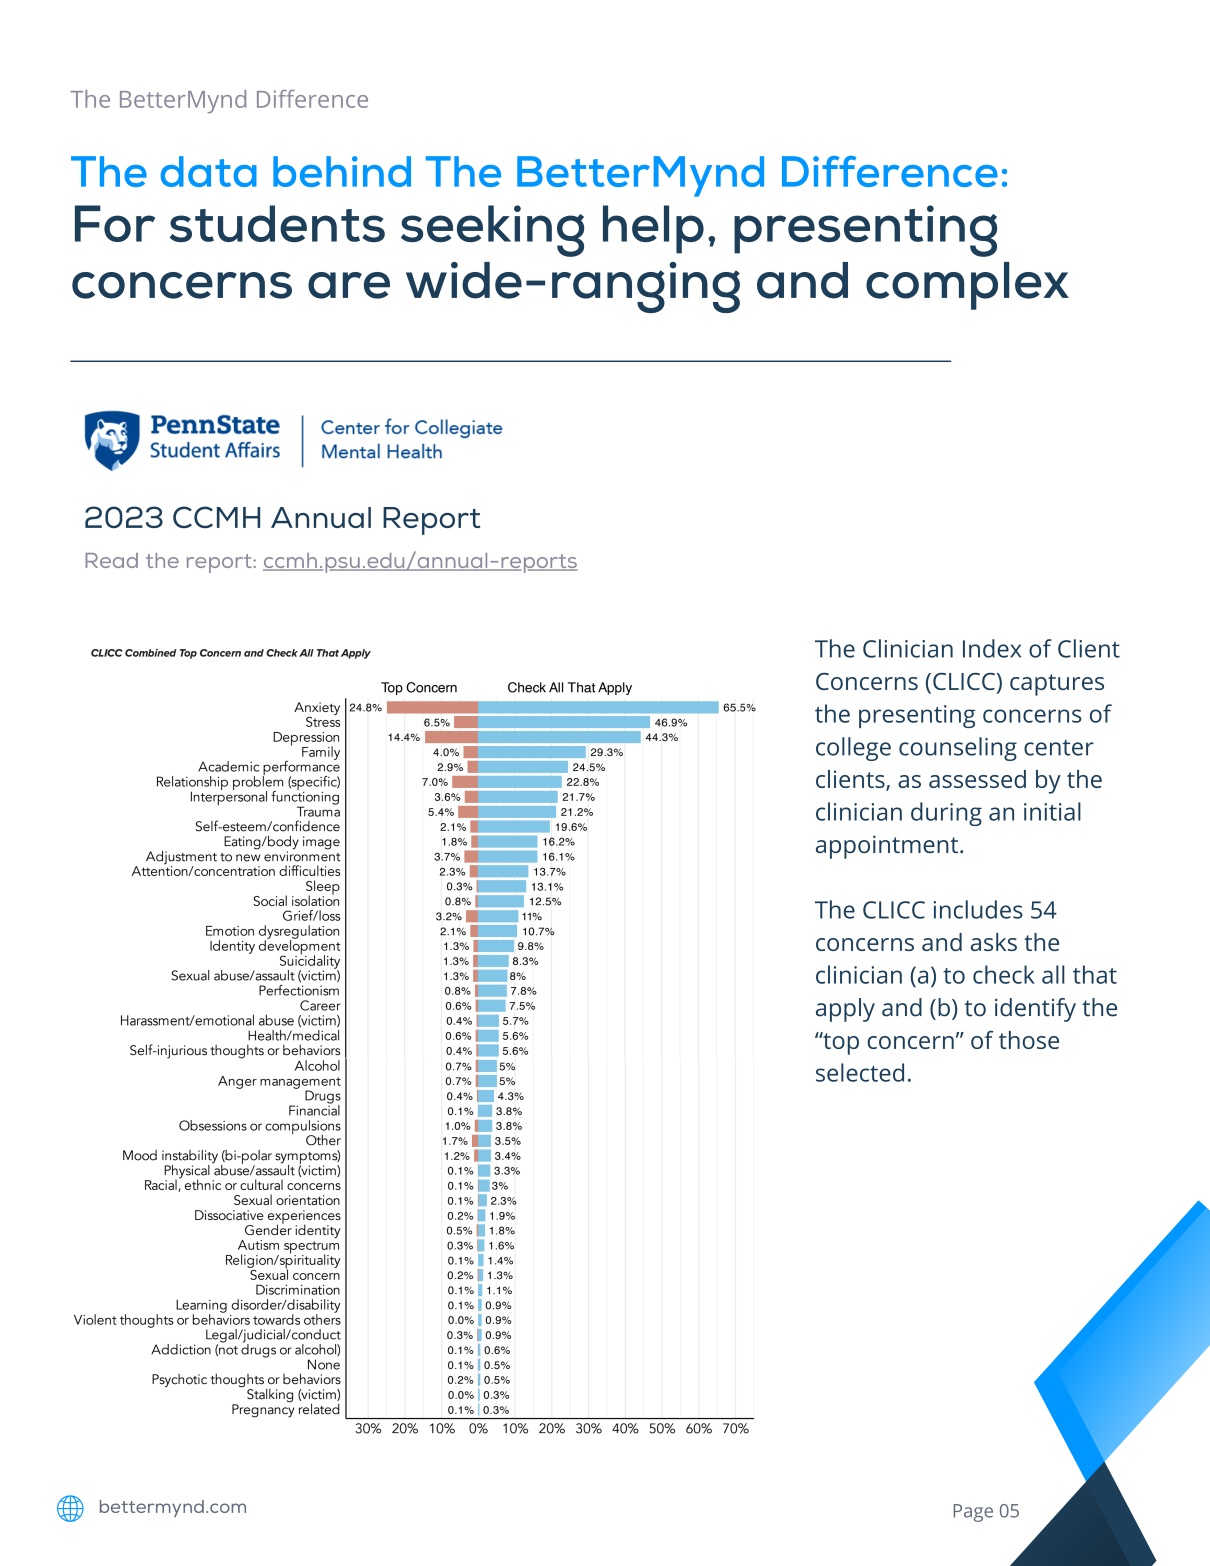 For students seeking help, presenting concerns are wide-ranging and complex